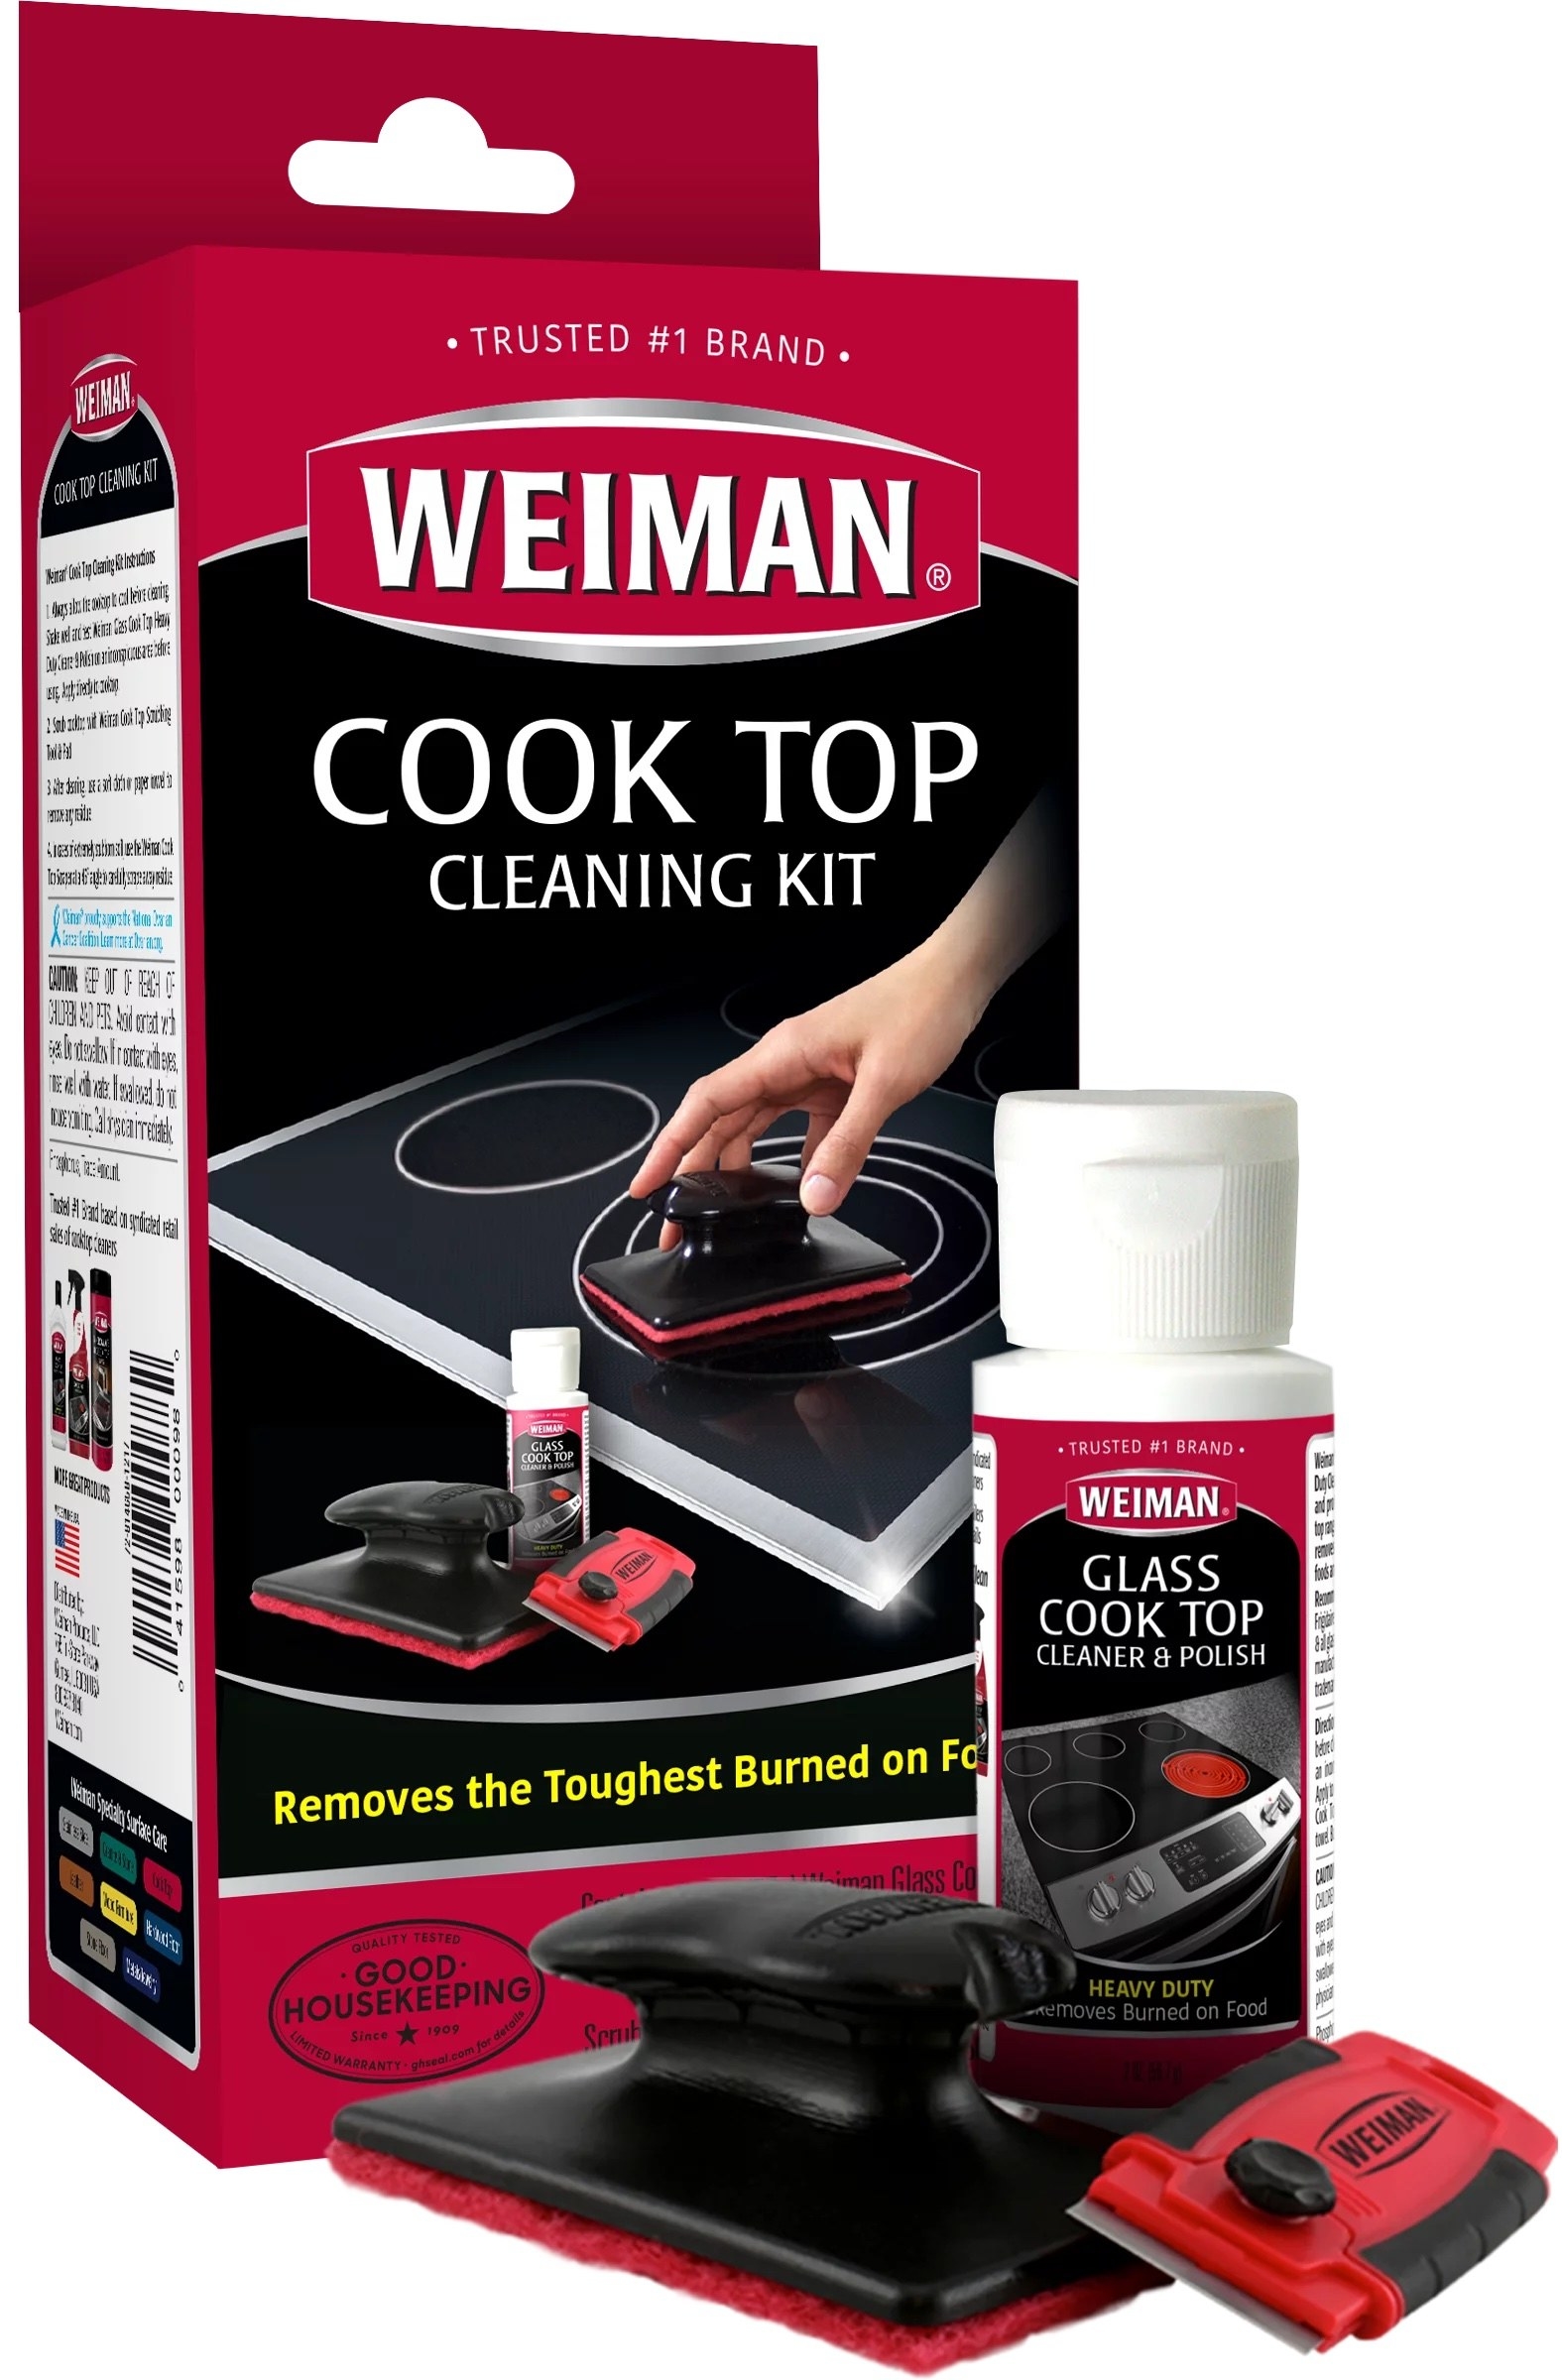 a cooktop cleaning kit with a cleaner, scraper, and polish